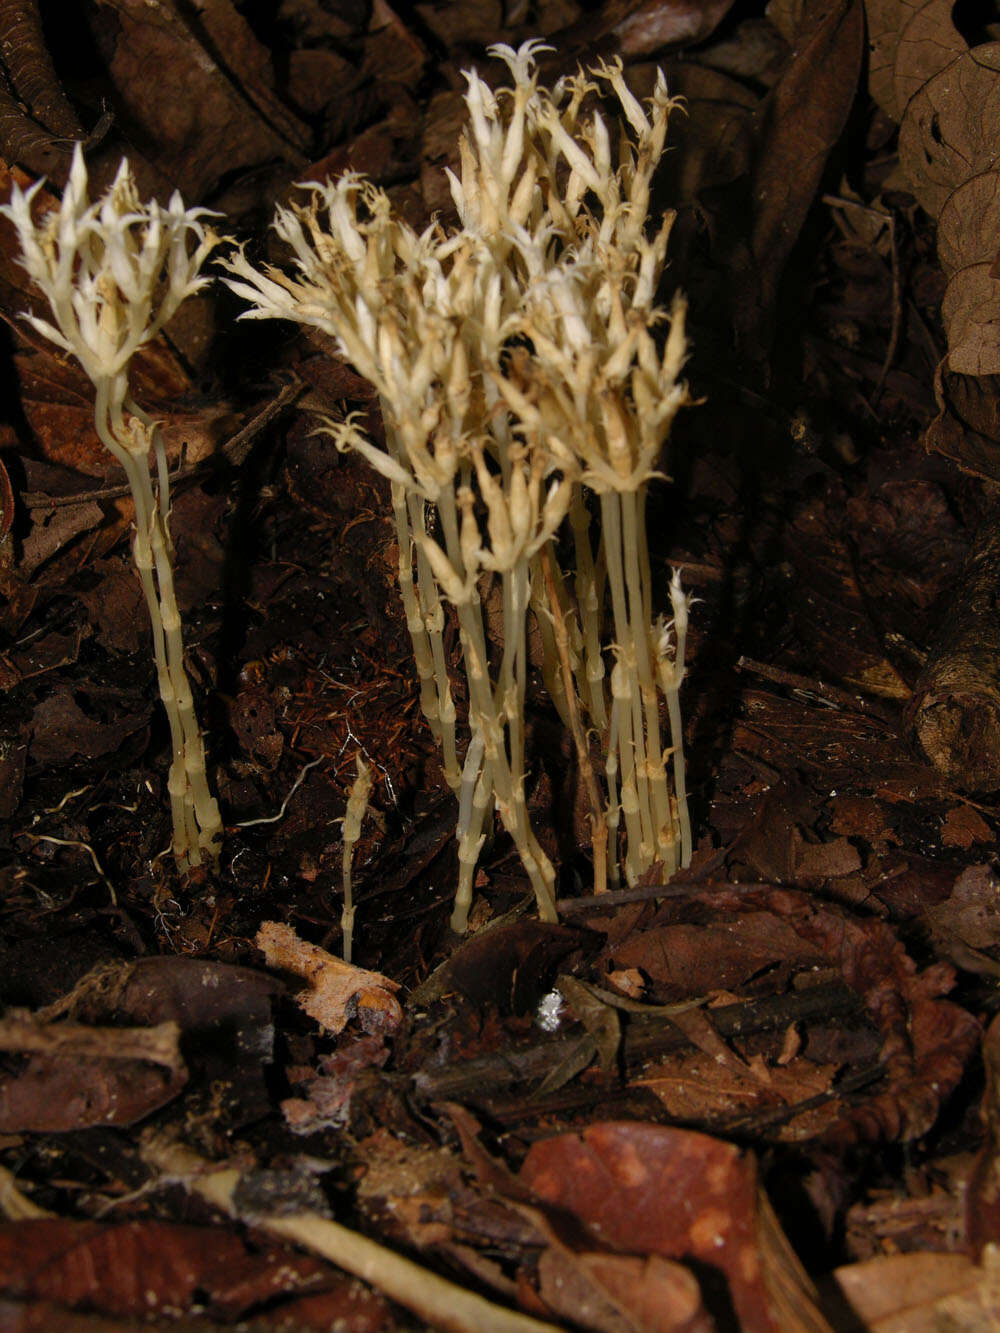 Image of ghostplant